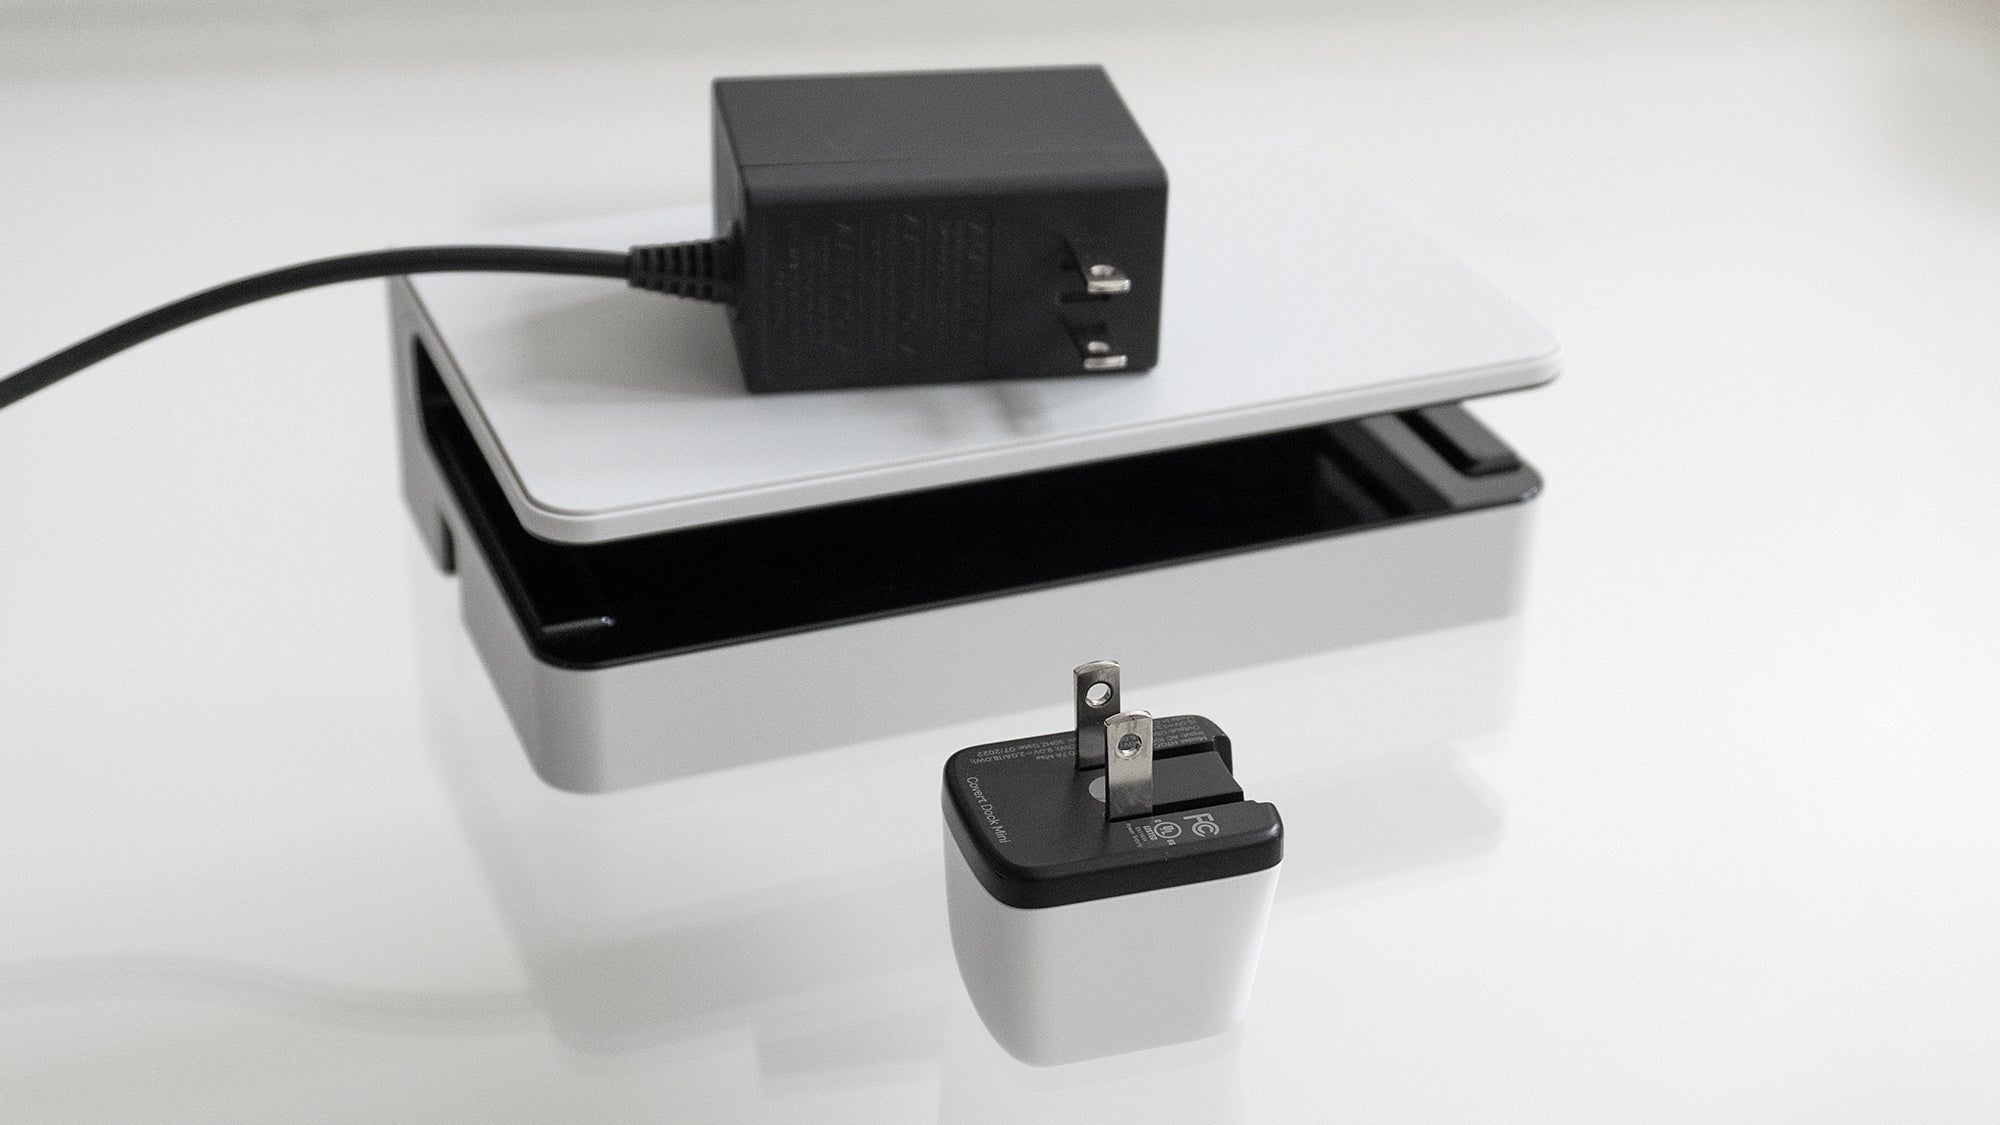 The Covert Dock Mini replaces the Switch's dock and power adaptor with a single device. (Photo: Andrew Liszewski | Gizmodo)